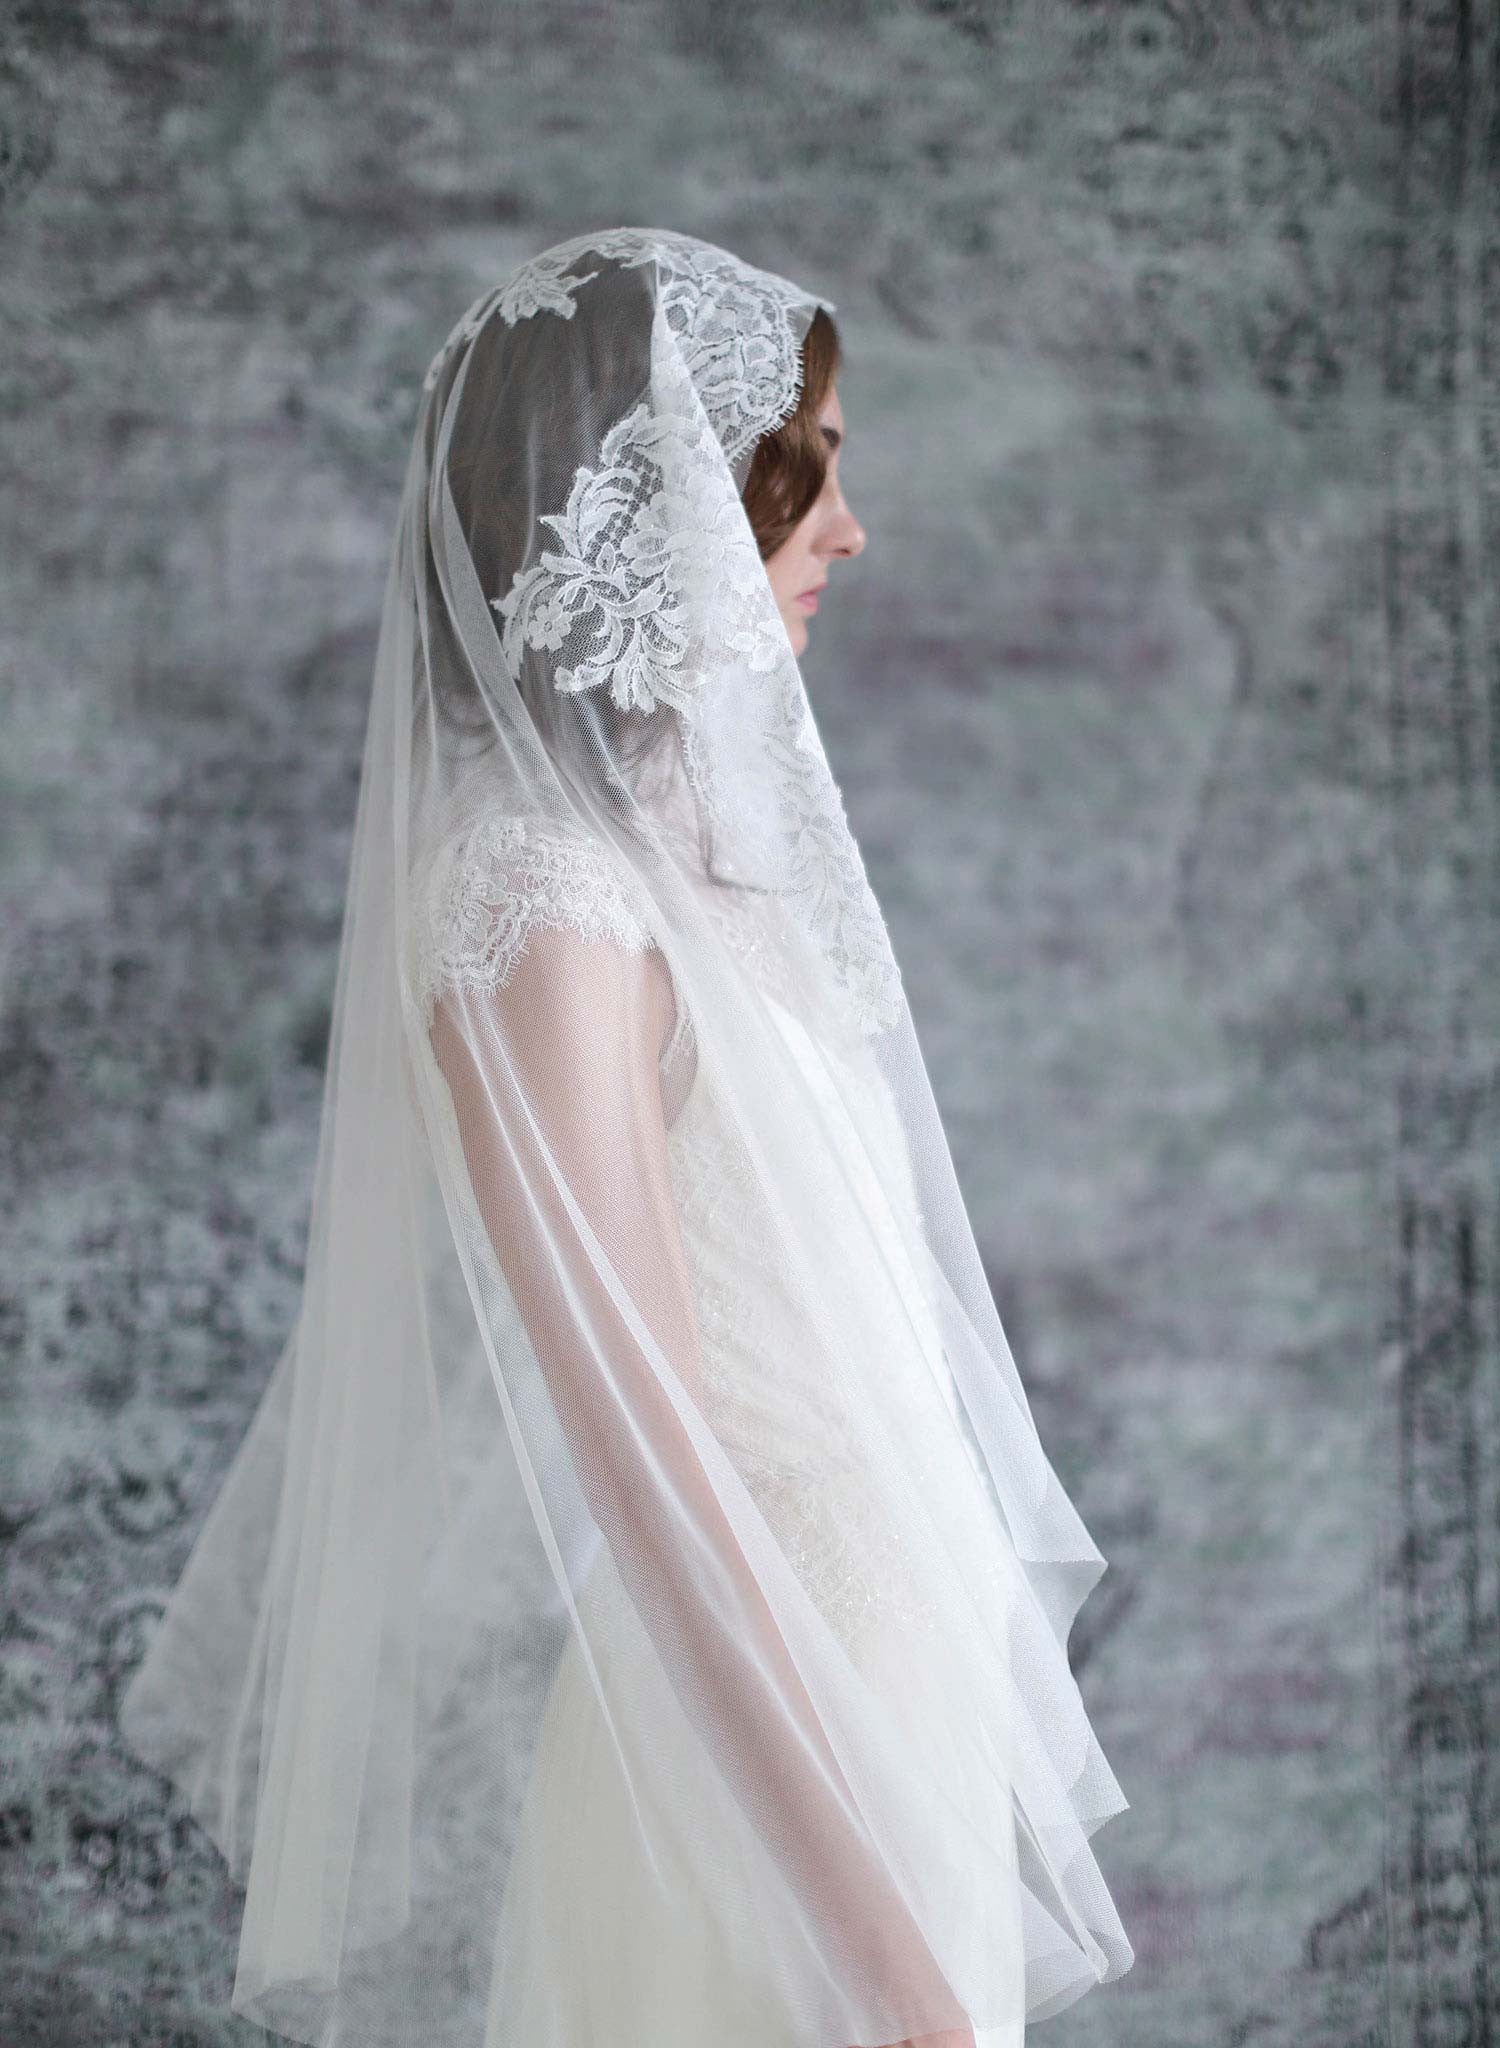 Twigs & Honey Silk Tulle Alencon Lace Trim Veil - Style #222 108 Train and 26 Blusher